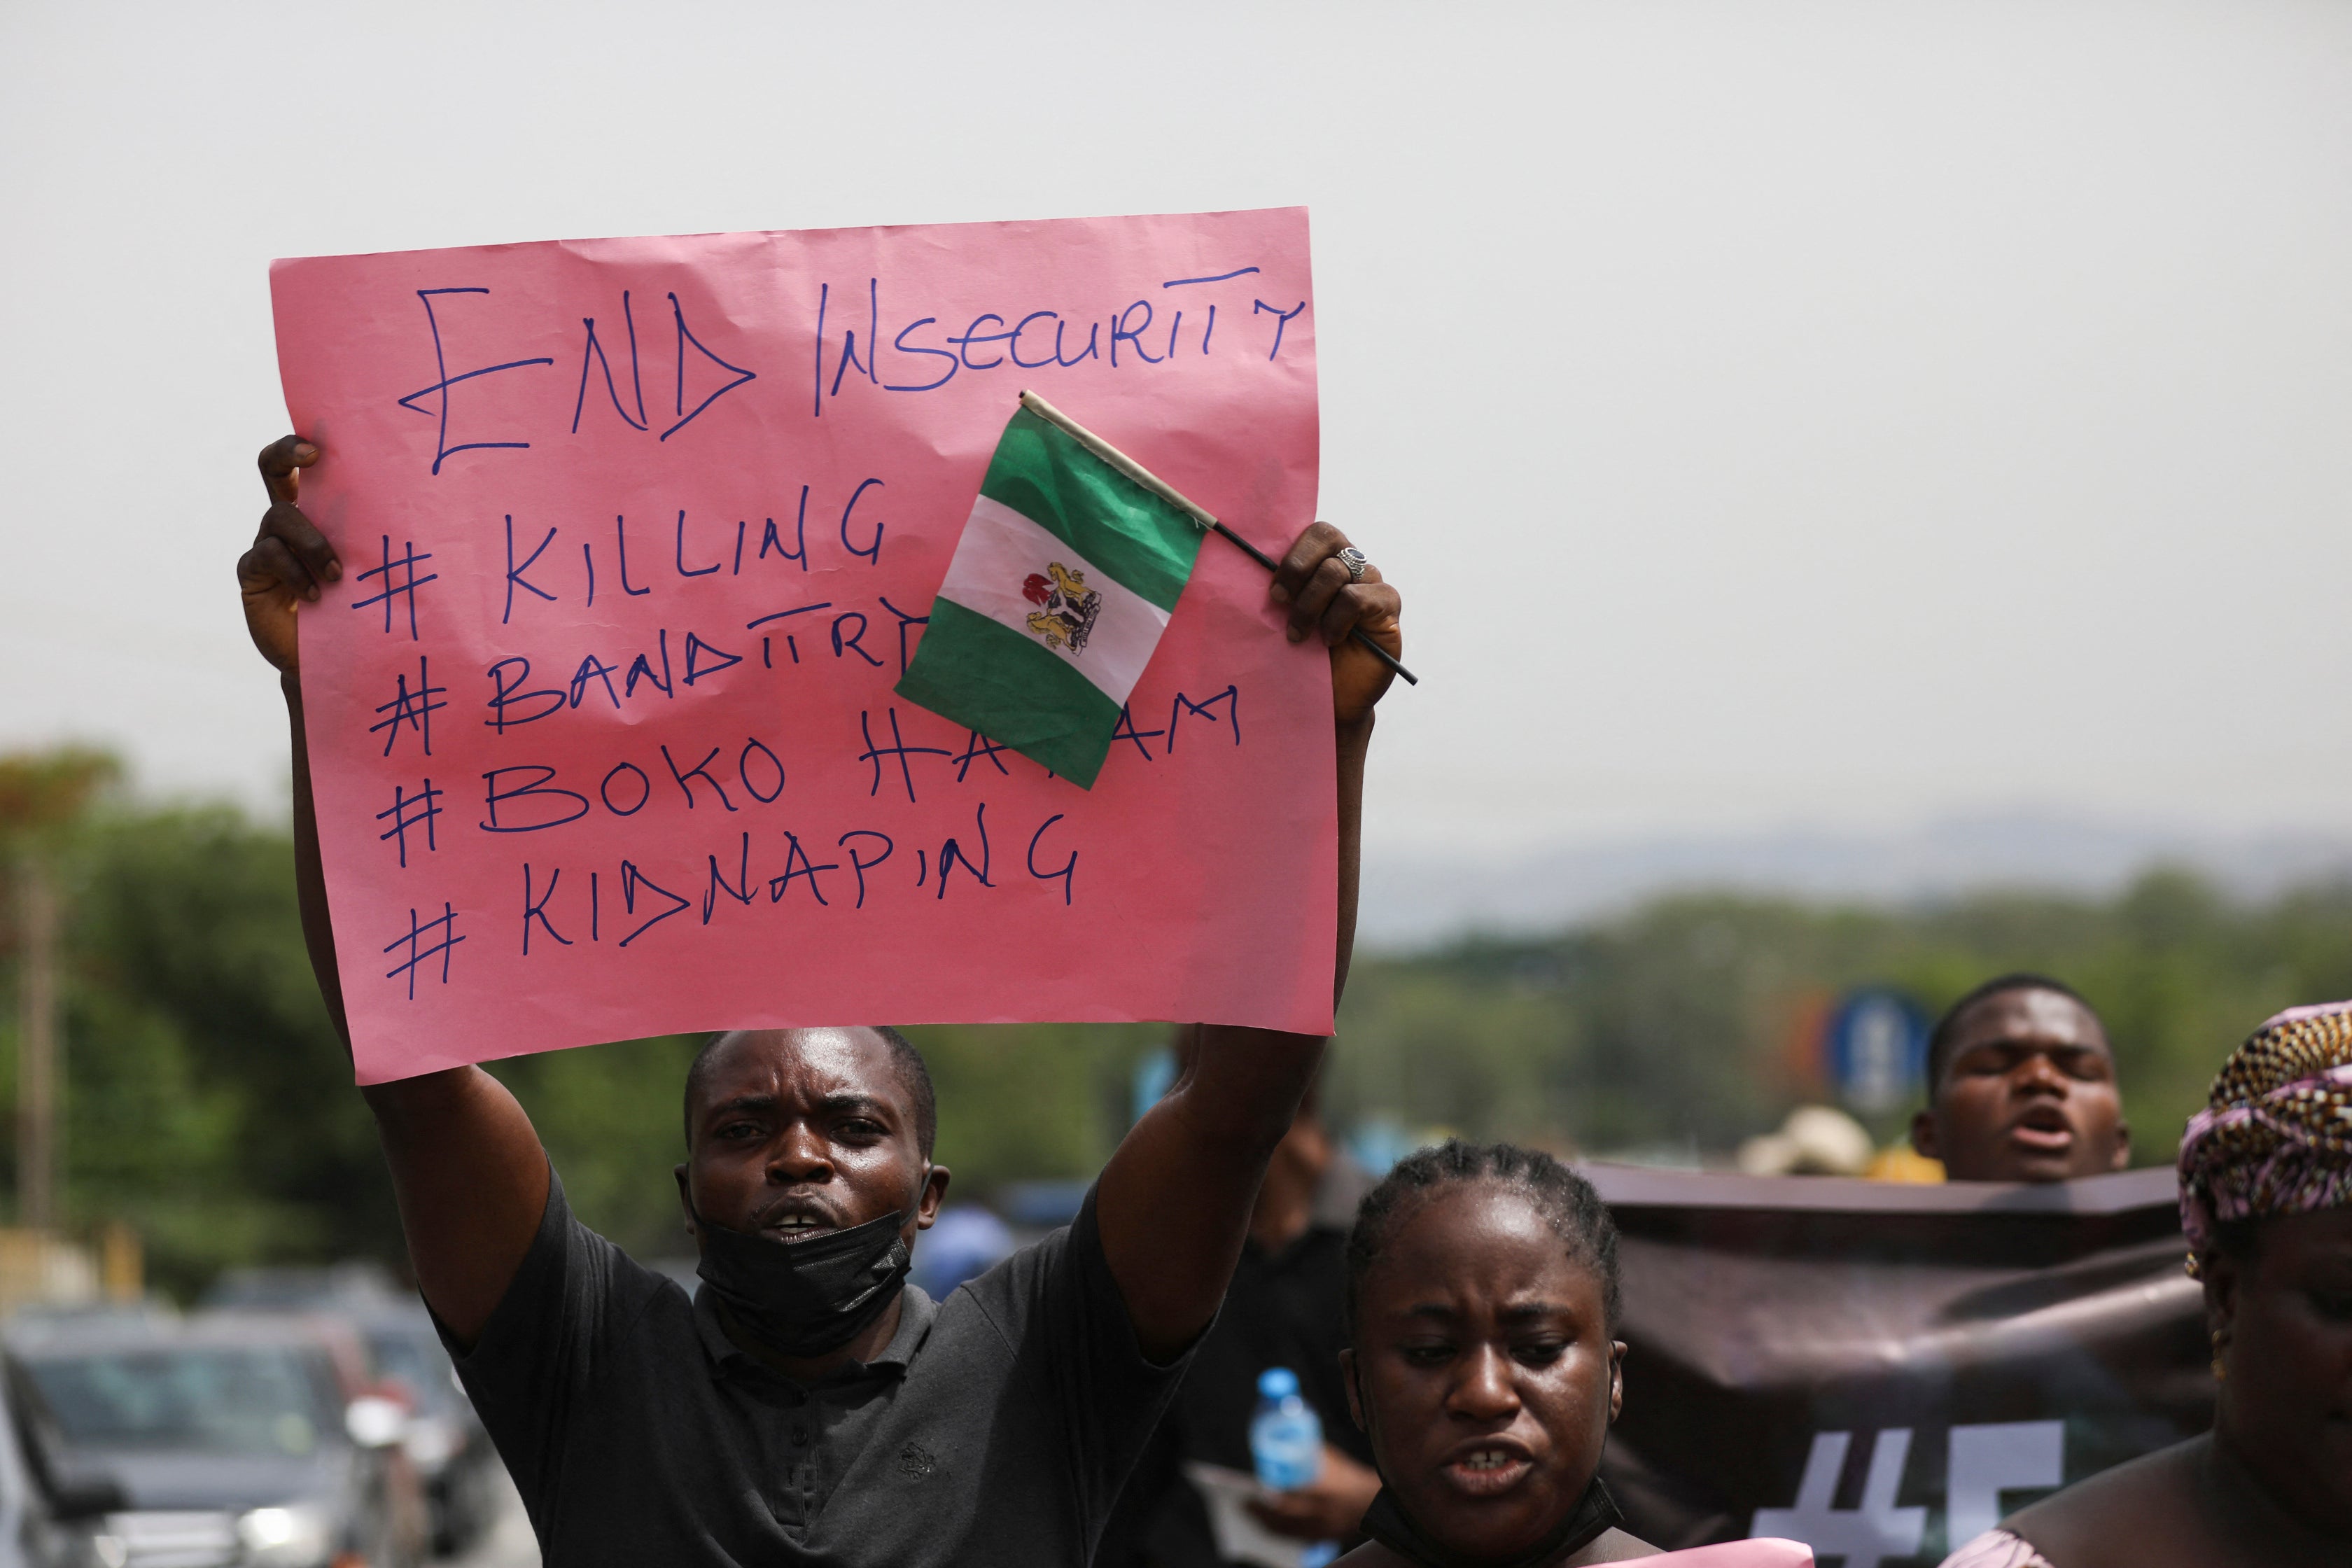 Protestors rallying against kidnappings in Kaduna state, northwest Nigeria in May